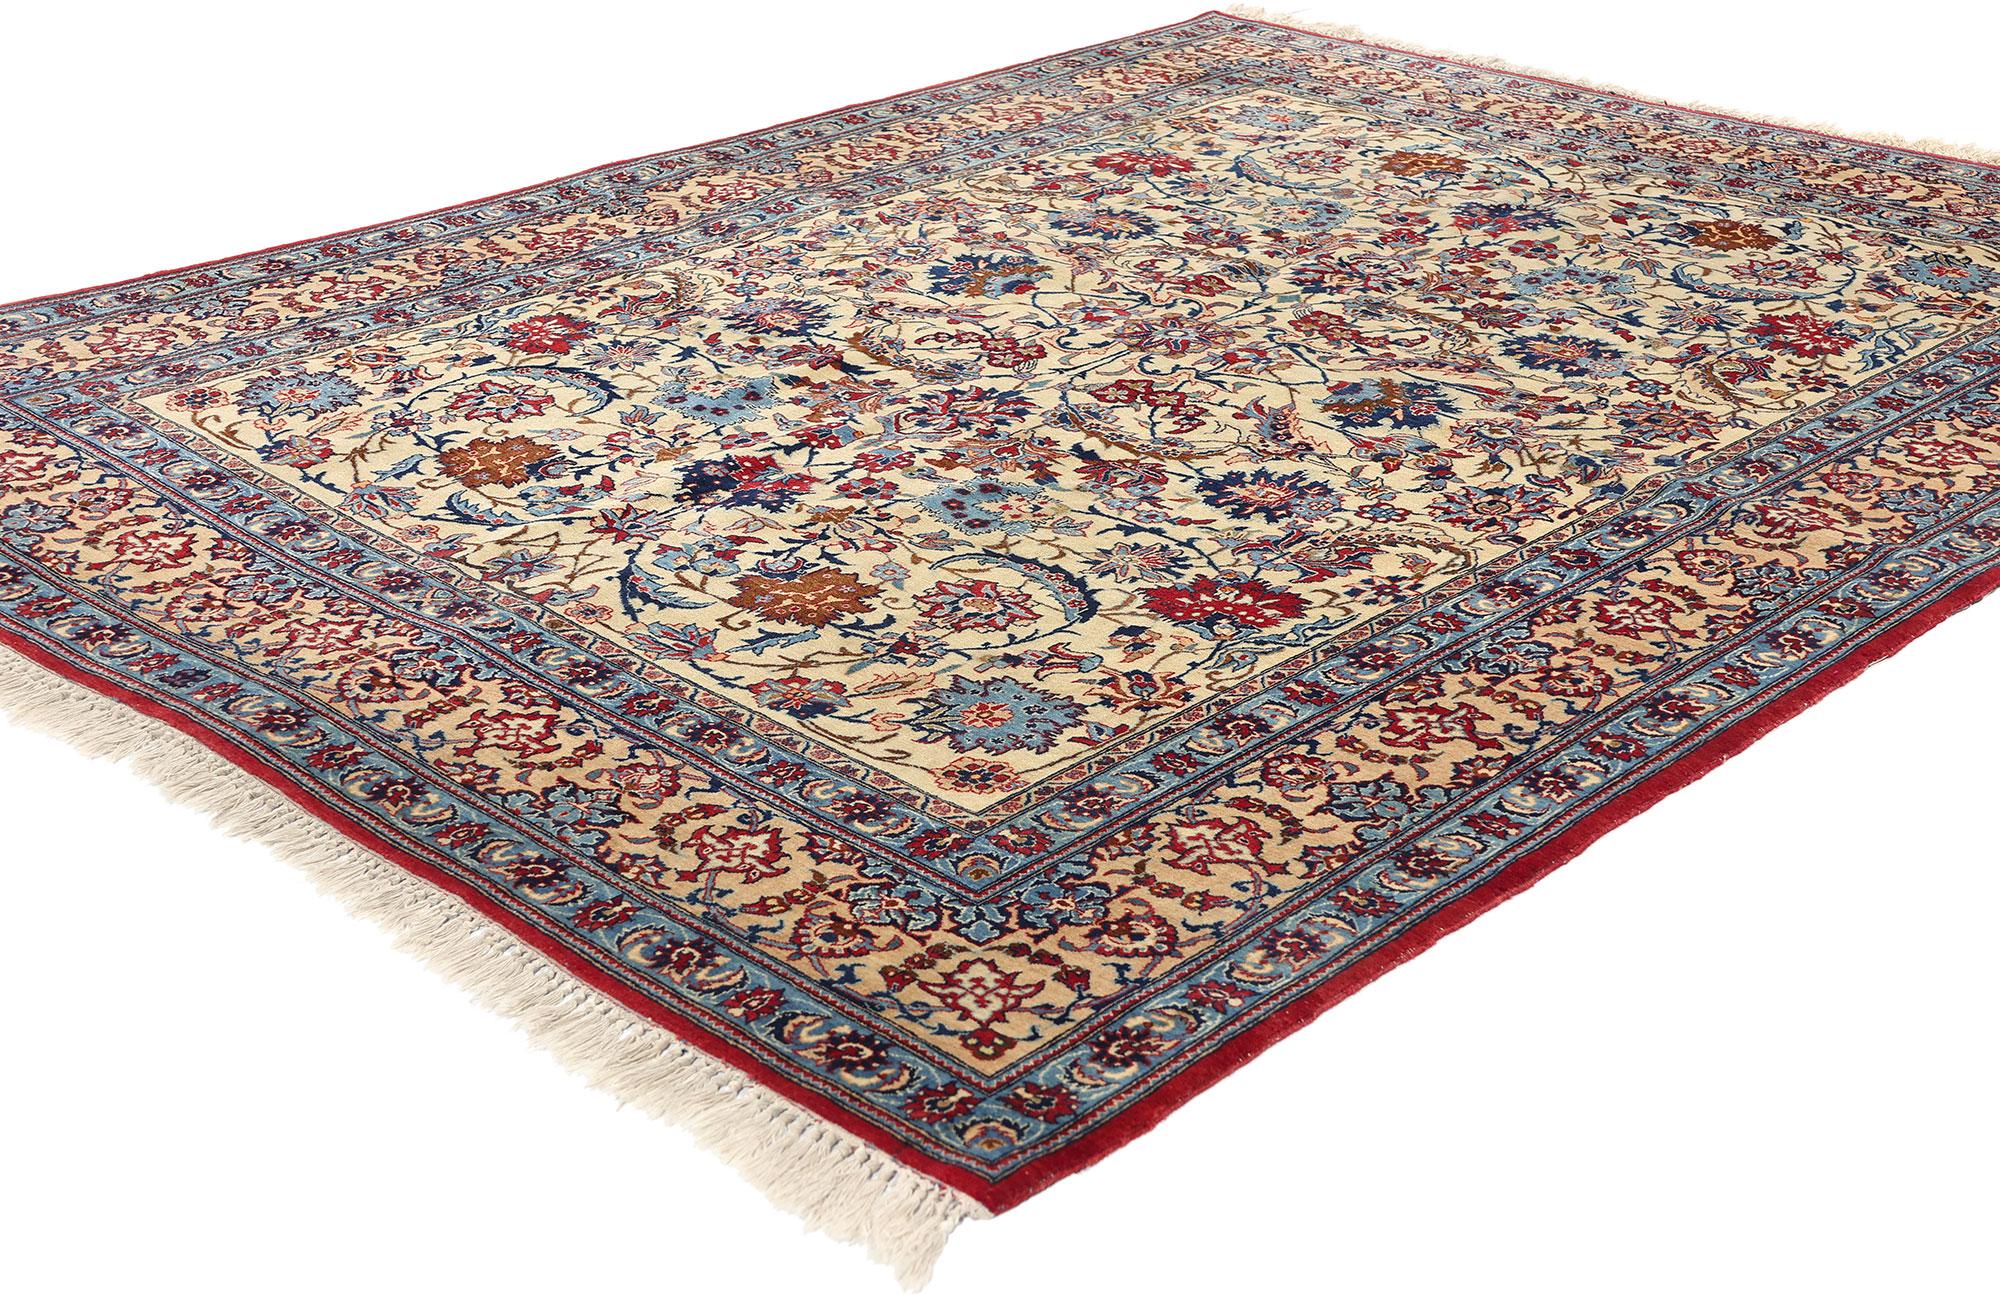 78680 Vintage Persian Isfahan Rug, 05'00 x 06'09. Nestled in the heart of central Iran lies a haven of artistry and tradition: the captivating city of Isfahan. Here, amid whispers of ancient legends and the lingering echoes of masterful artisans,